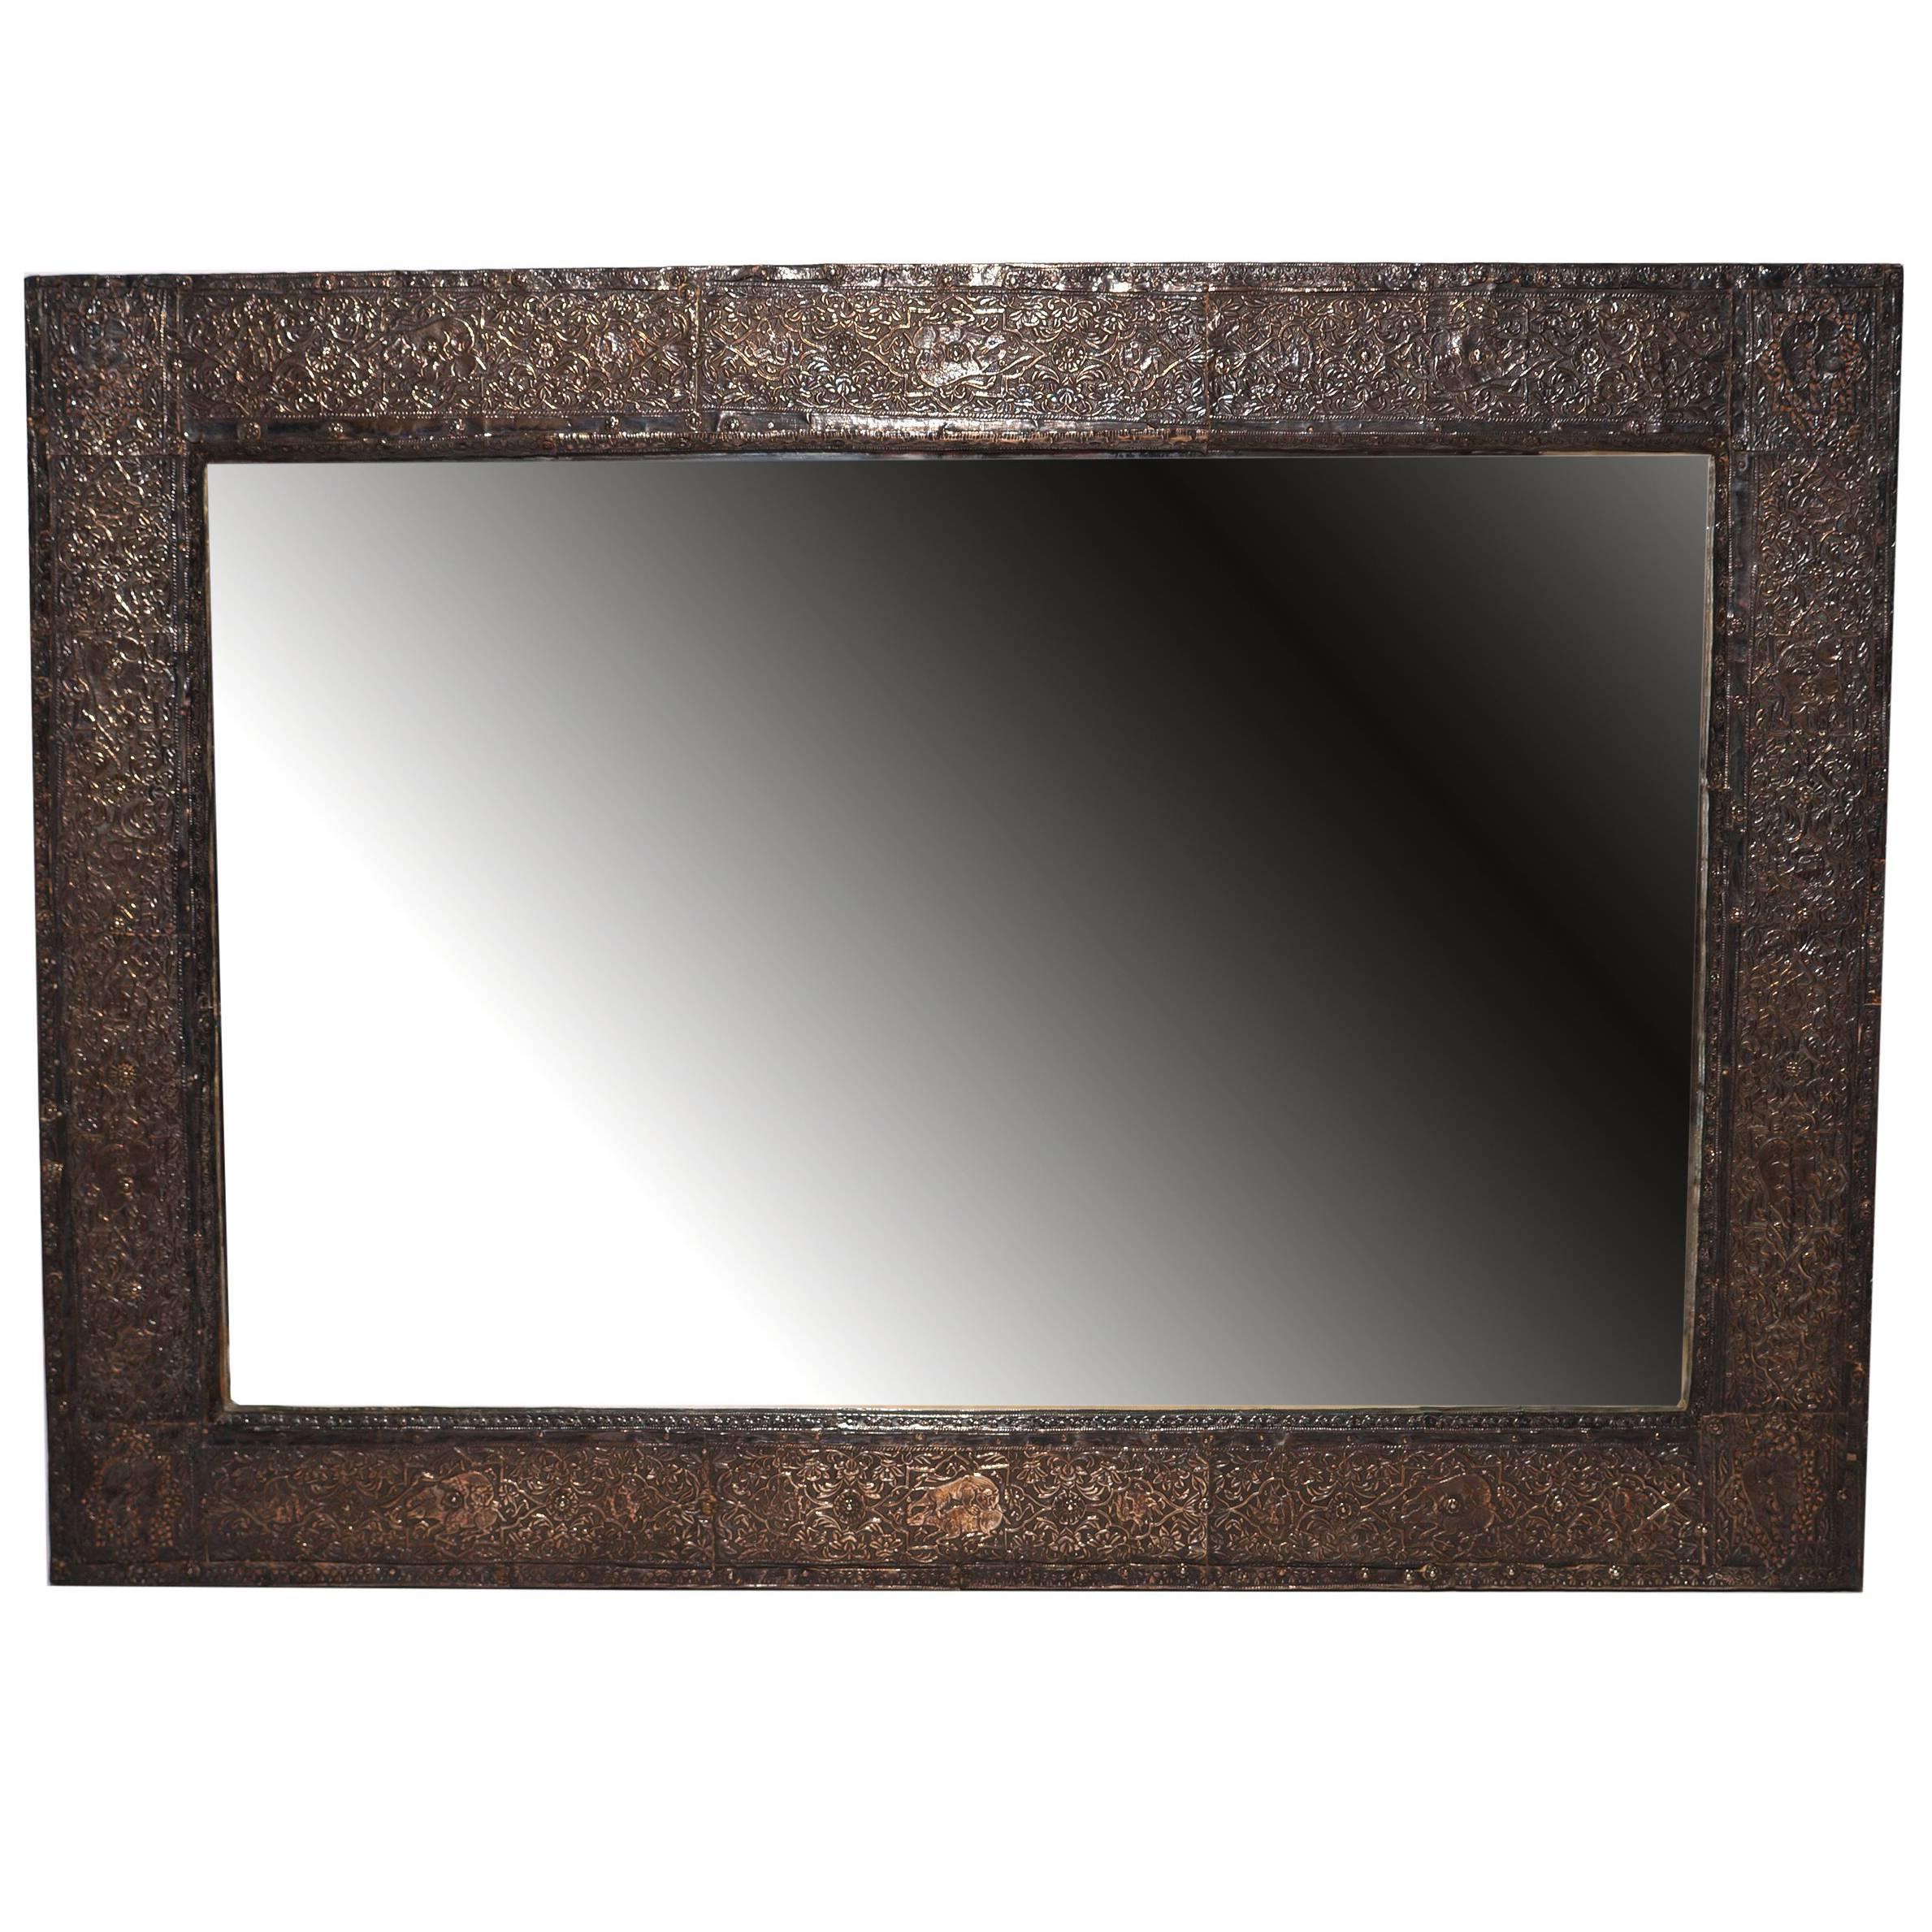 Silver Rectangular or Vertical Wall Mirror with Raised Floral Decoration